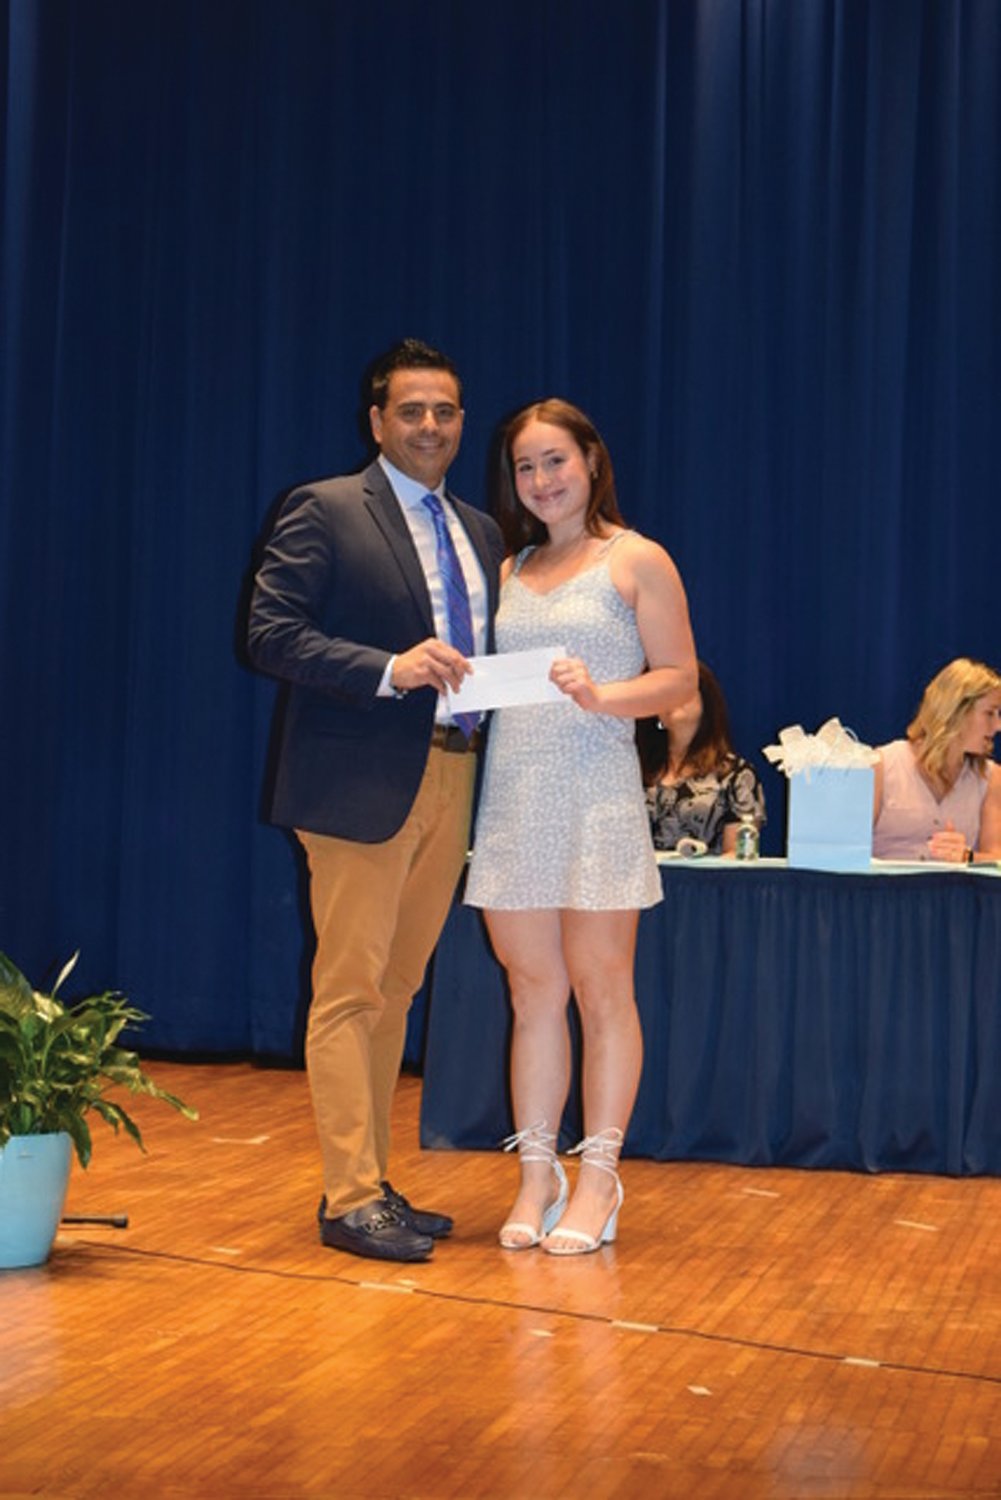 RUSSO MEMORIAL: Johnston Town Council President Robert V. Russo presents the Dr. and Mrs. Vito Russo Memorial Scholarship to Janet Clements during last week’s Senior Honor Awards Night.